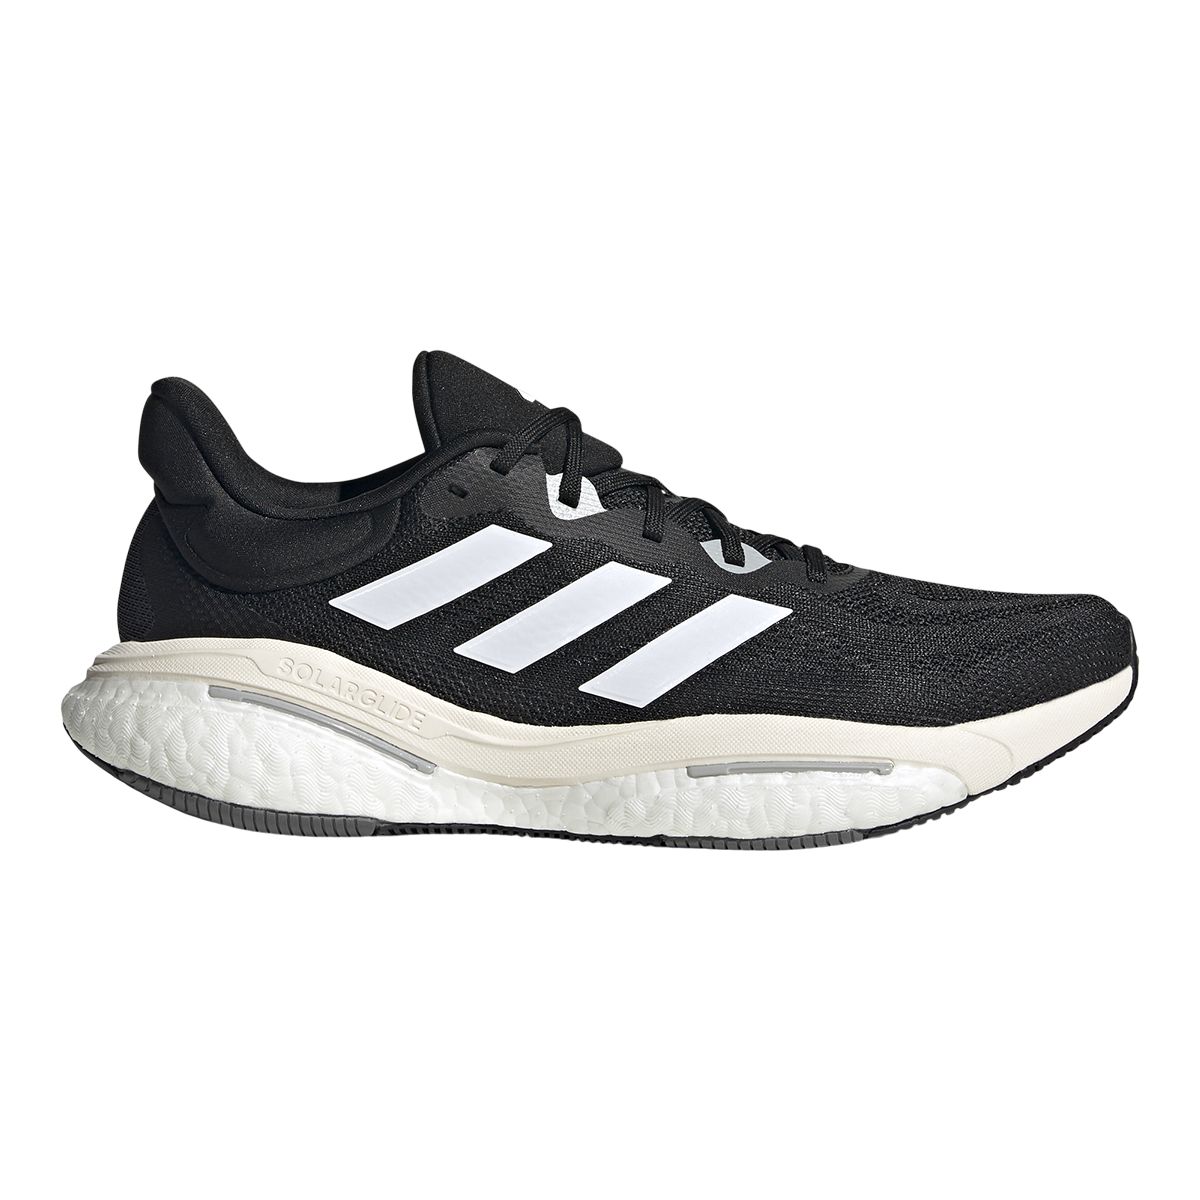 Image of adidas Men's Solarglide 6 Lightweight Knit Running Shoes